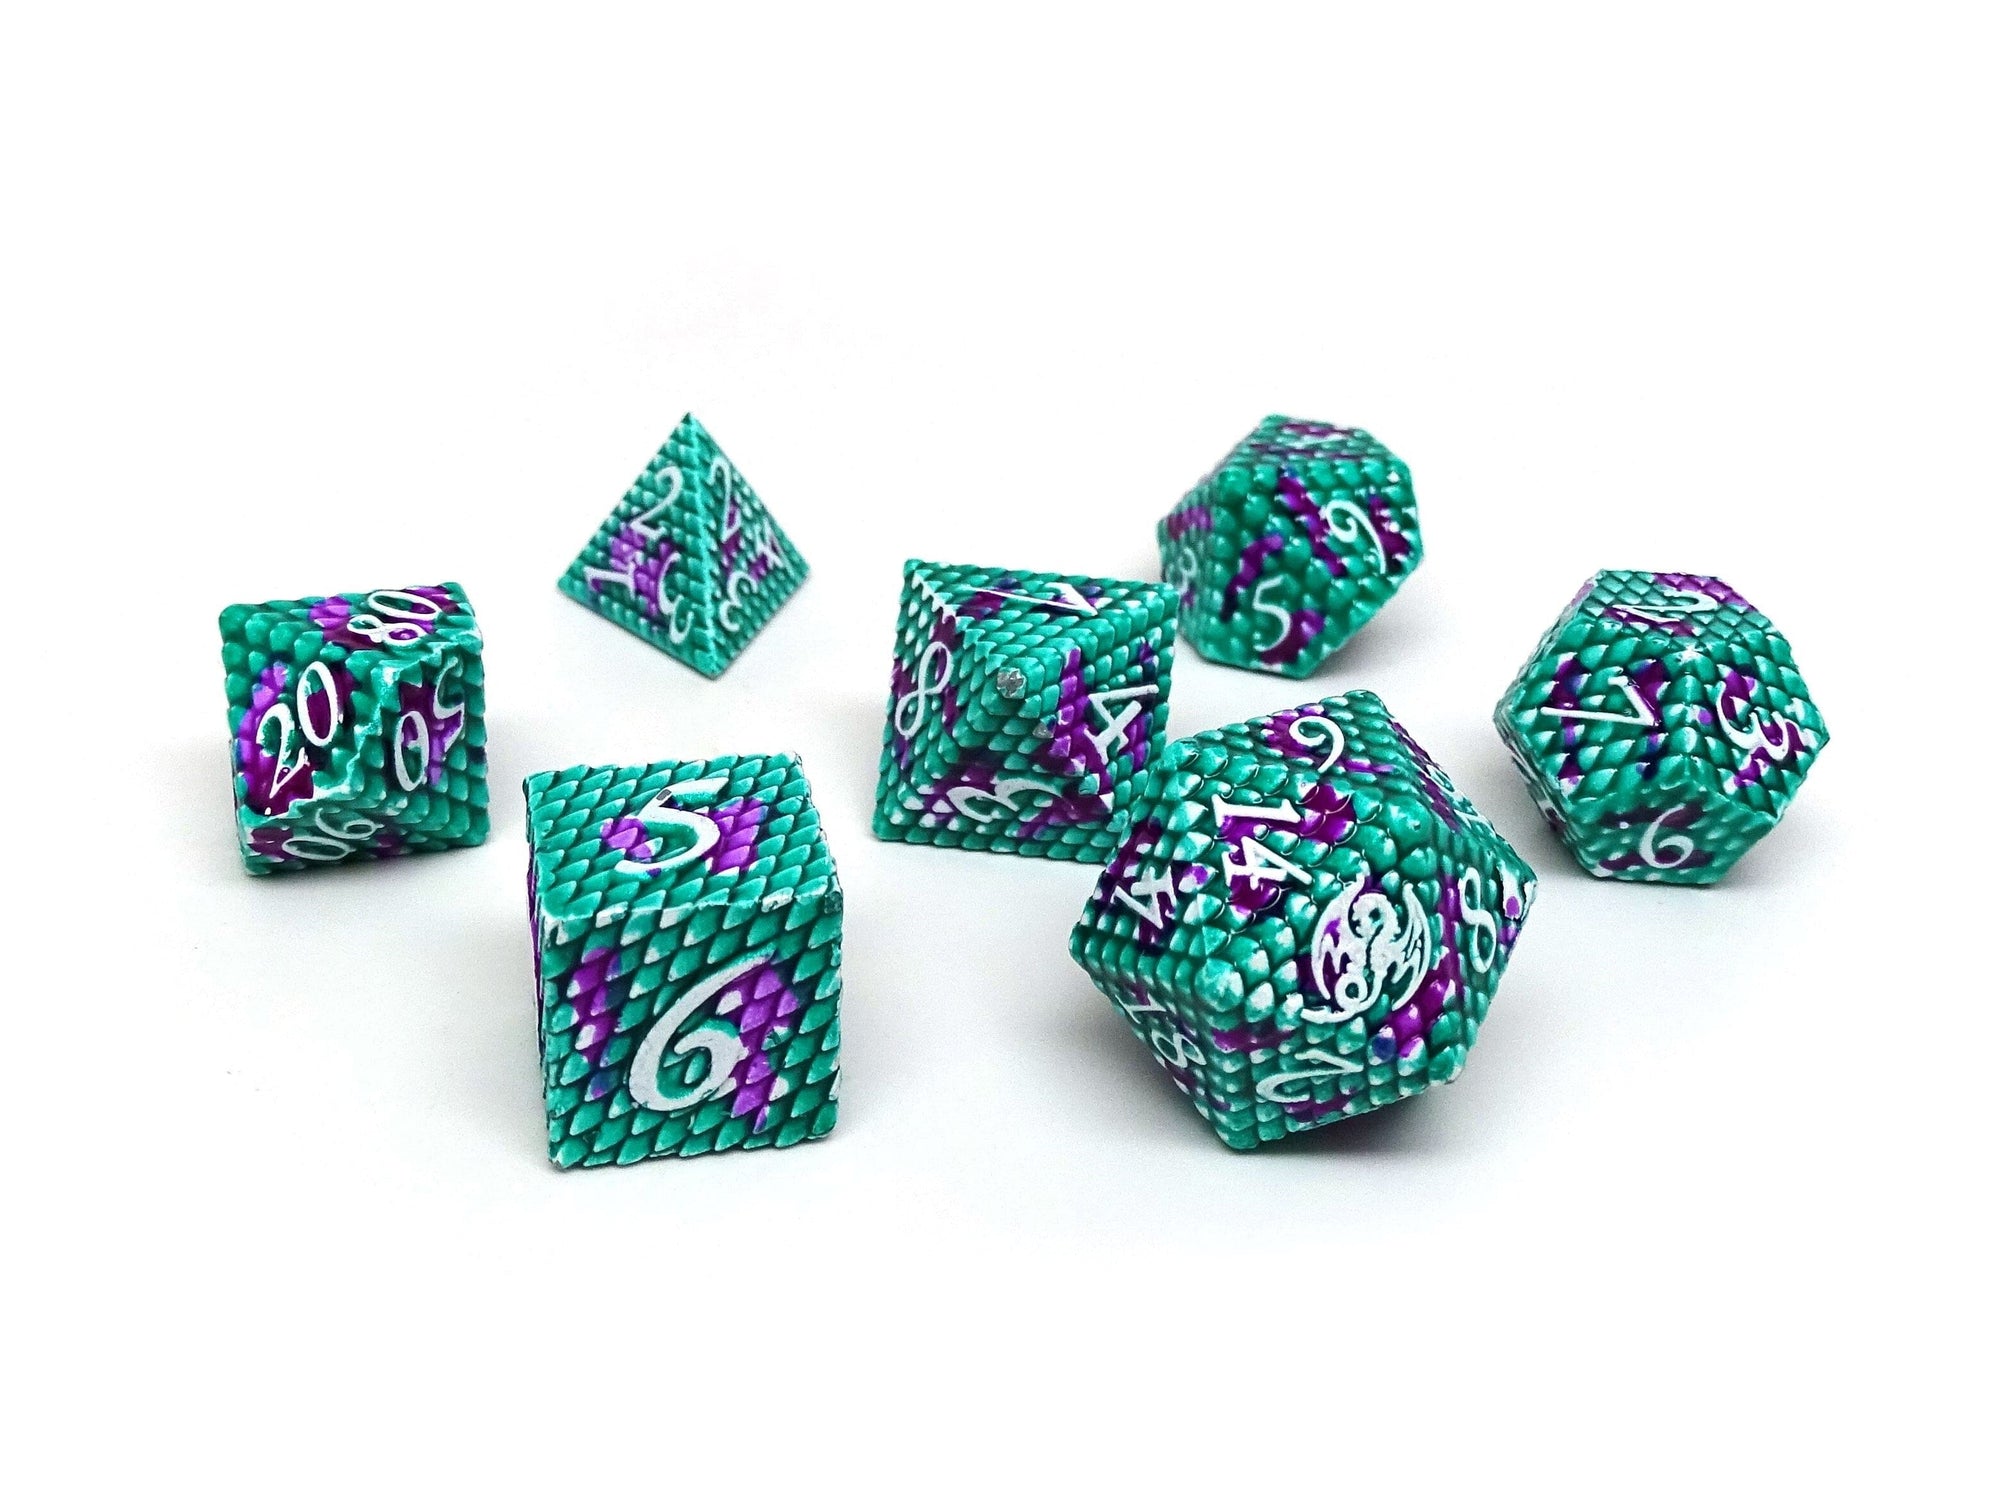 Dragon Scale Metal Dice - Poison Scales